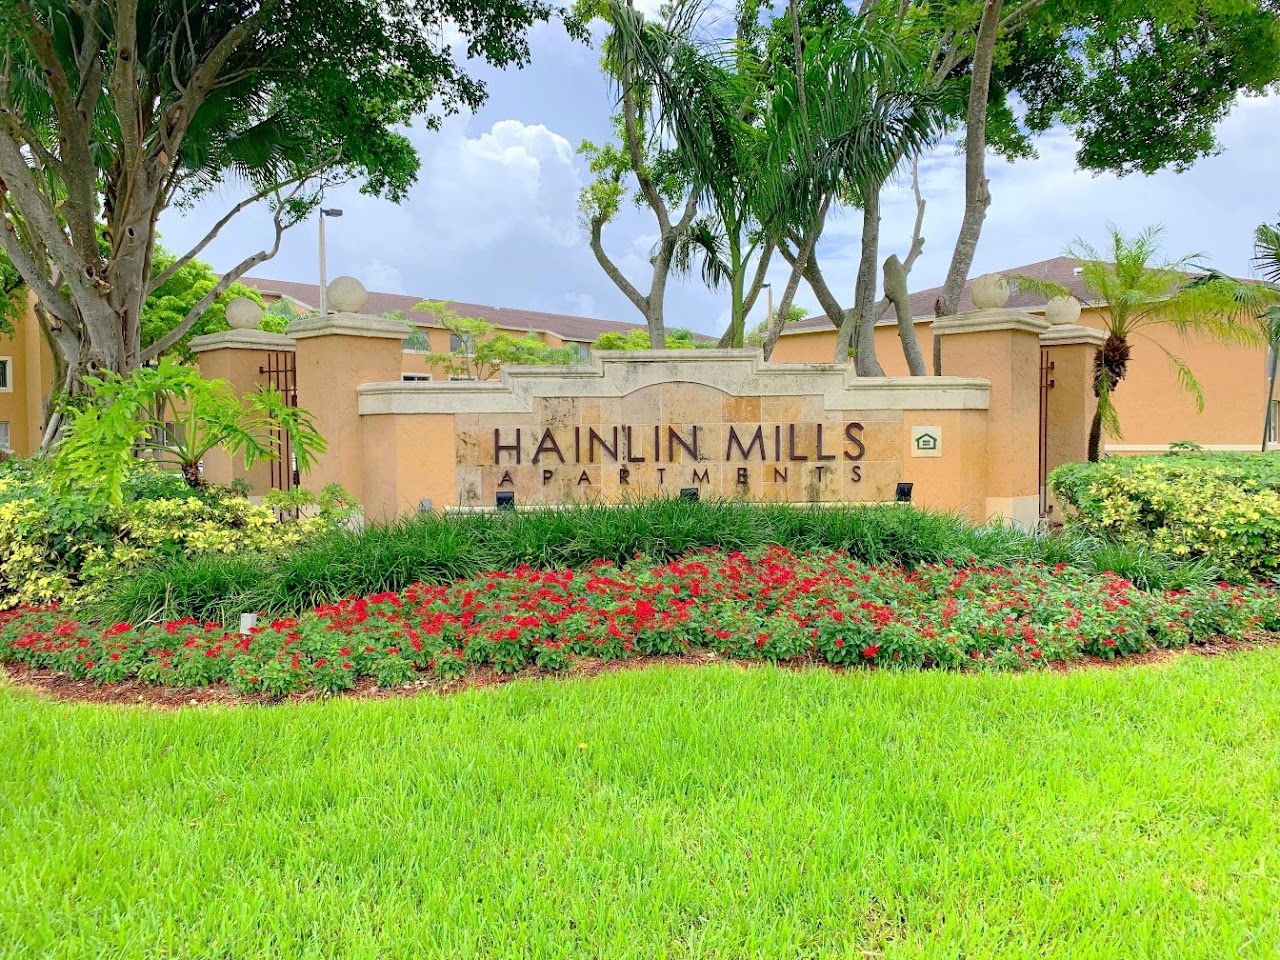 Photo of HAINLIN MILLS at 10400 SW 216TH ST CUTLER BAY, FL 33190